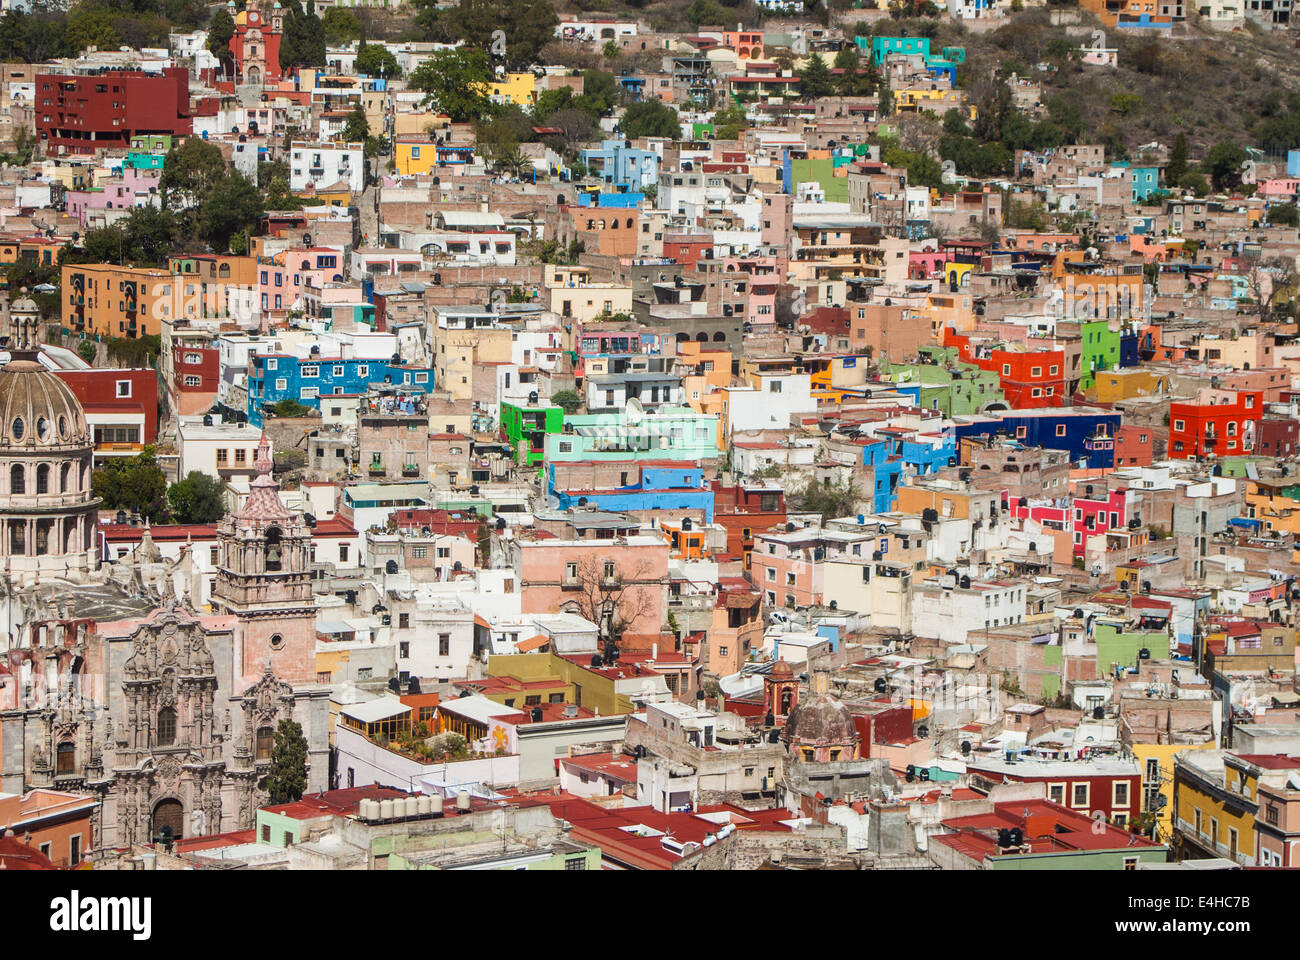 Guanajuato, Mexico a World Heritage Site with historic city view of 16th century buildings and colorful houses Stock Photo